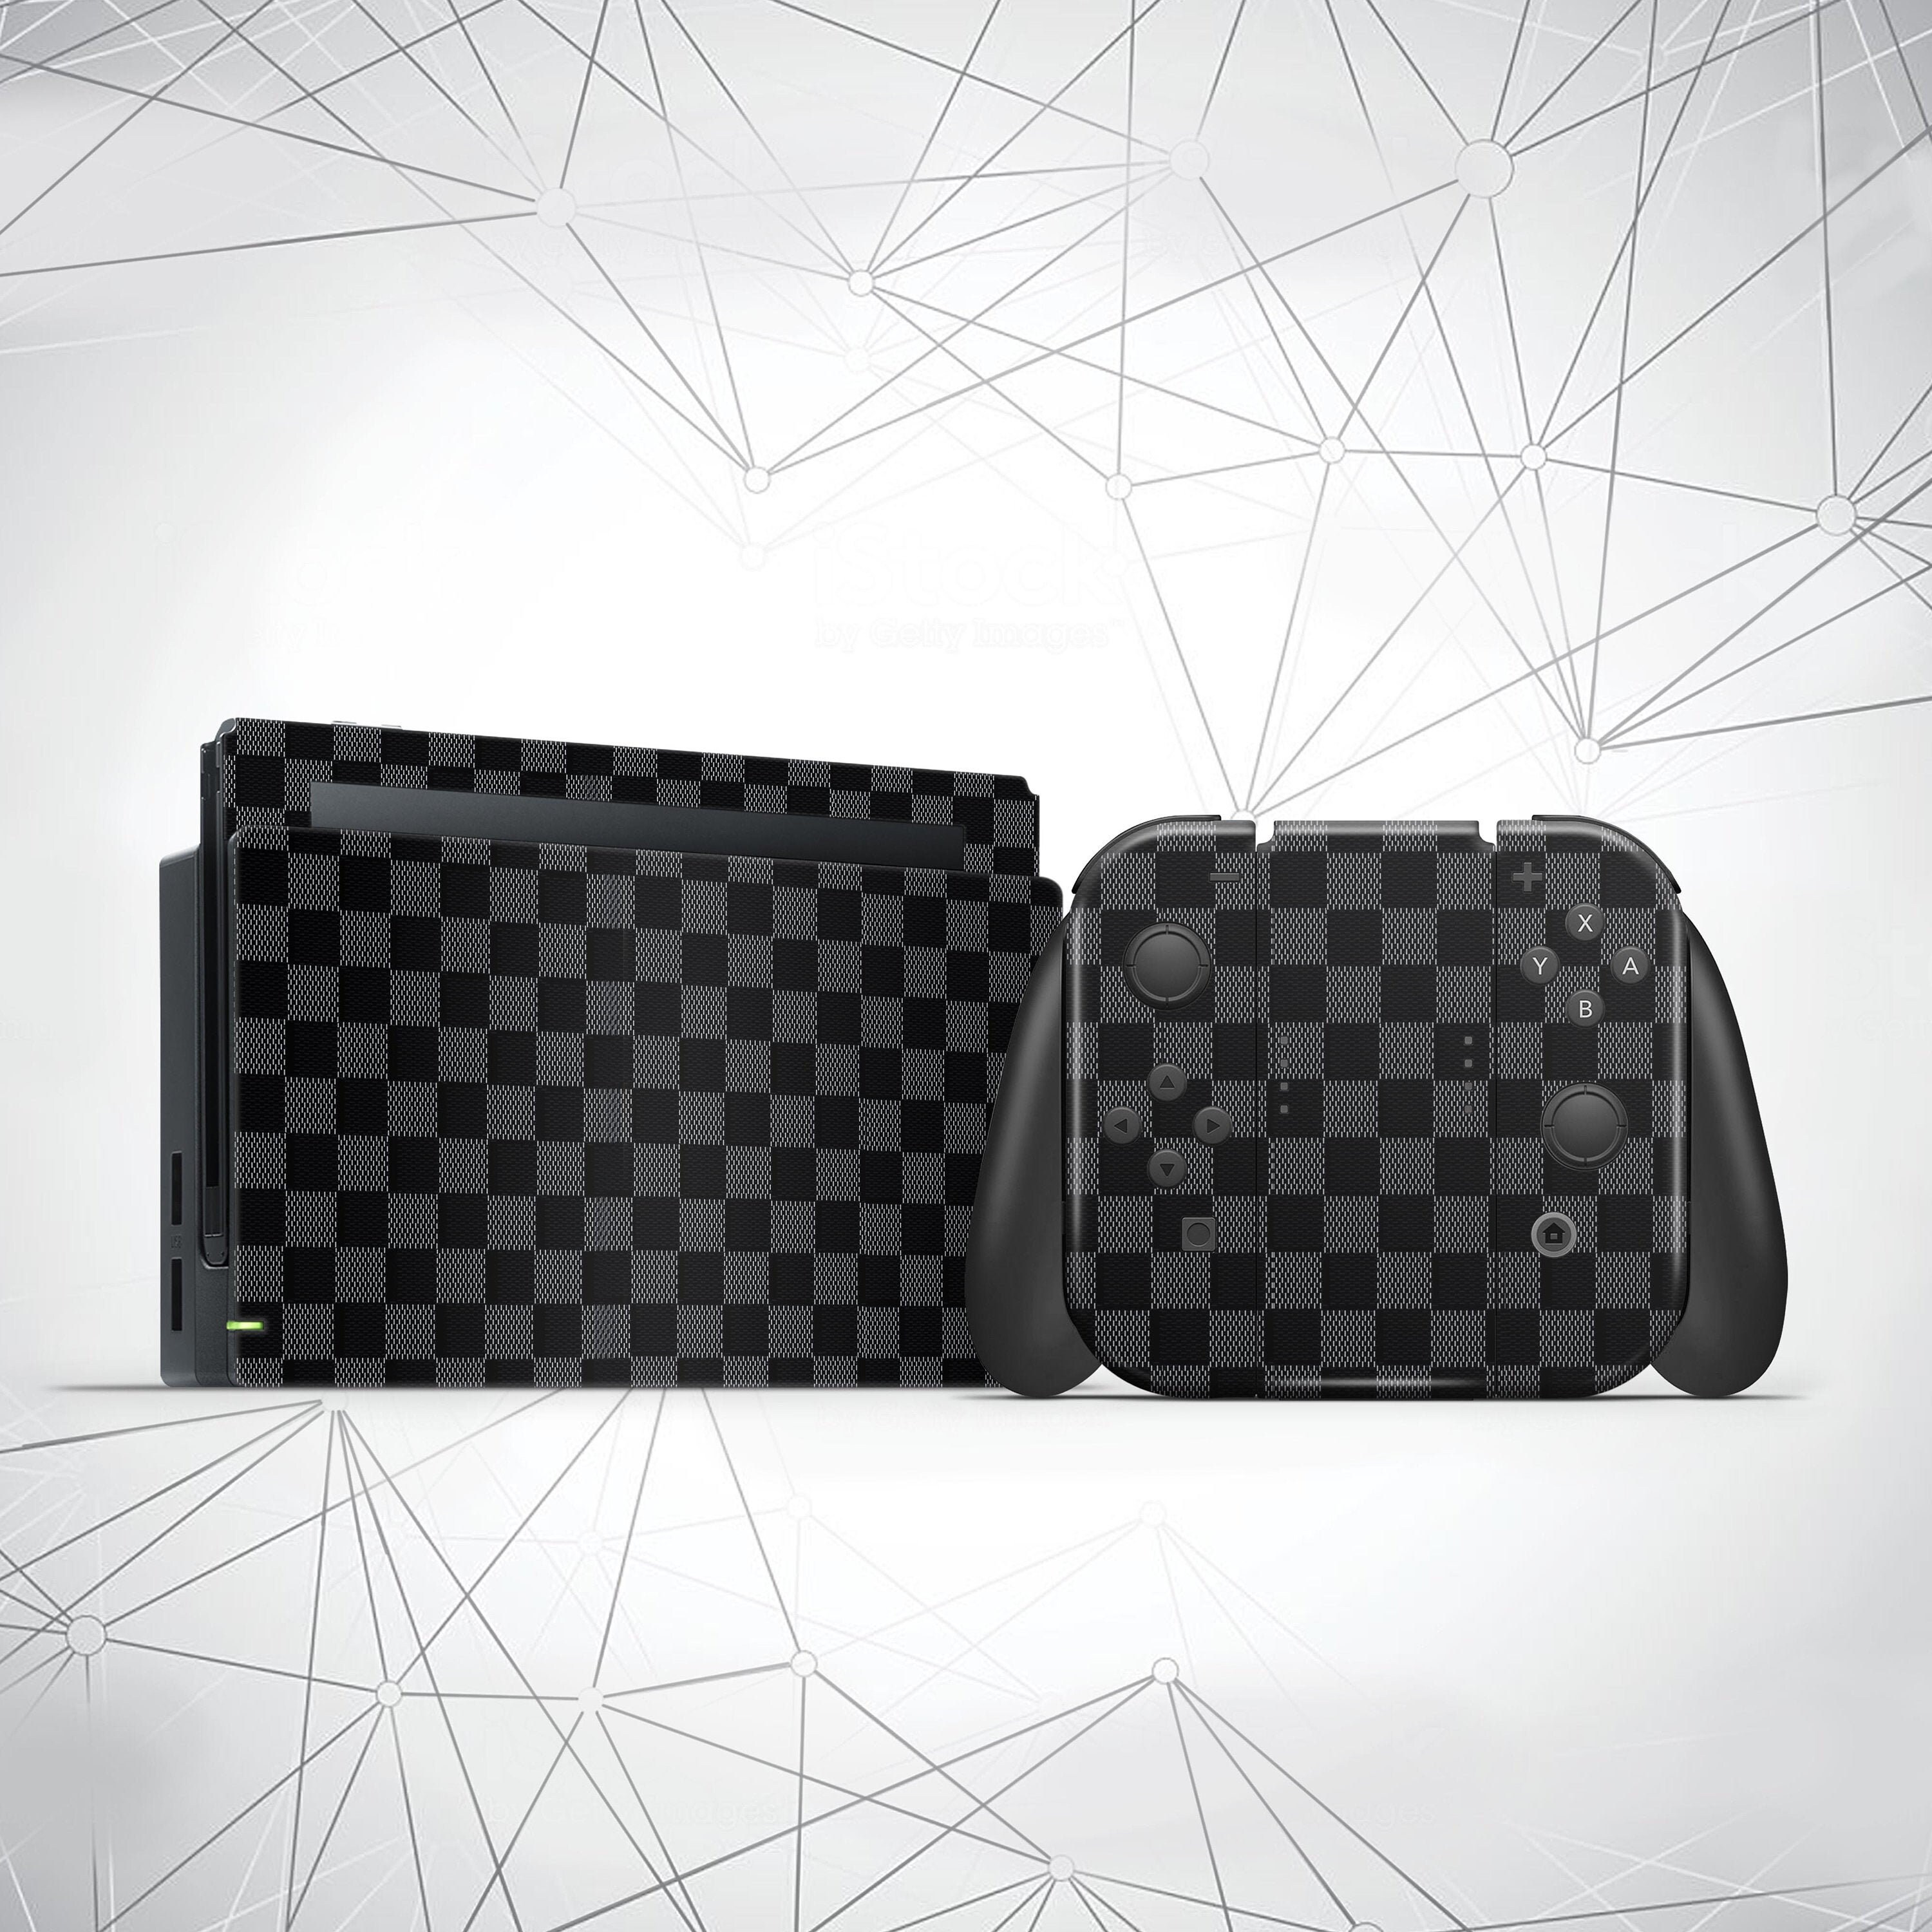 Chessboard Skin for the Nintendo Switch Gamer Console Fashion 